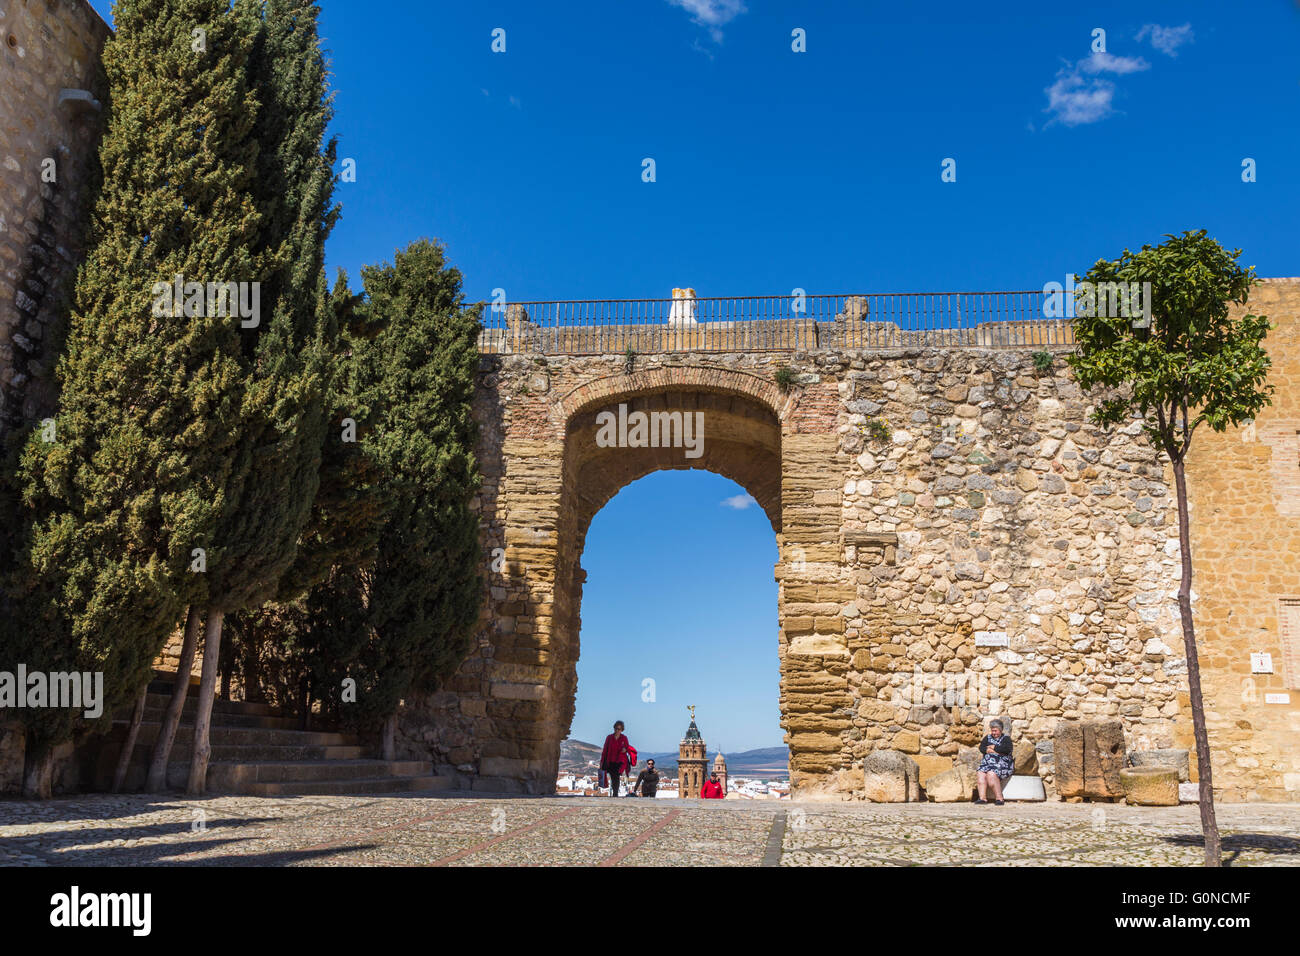 Antequera, Malaga Province, Andalusia, southern Spain.  Arco de los Gigantes (Arch of the Giants) seen from within the Alcazaba Stock Photo